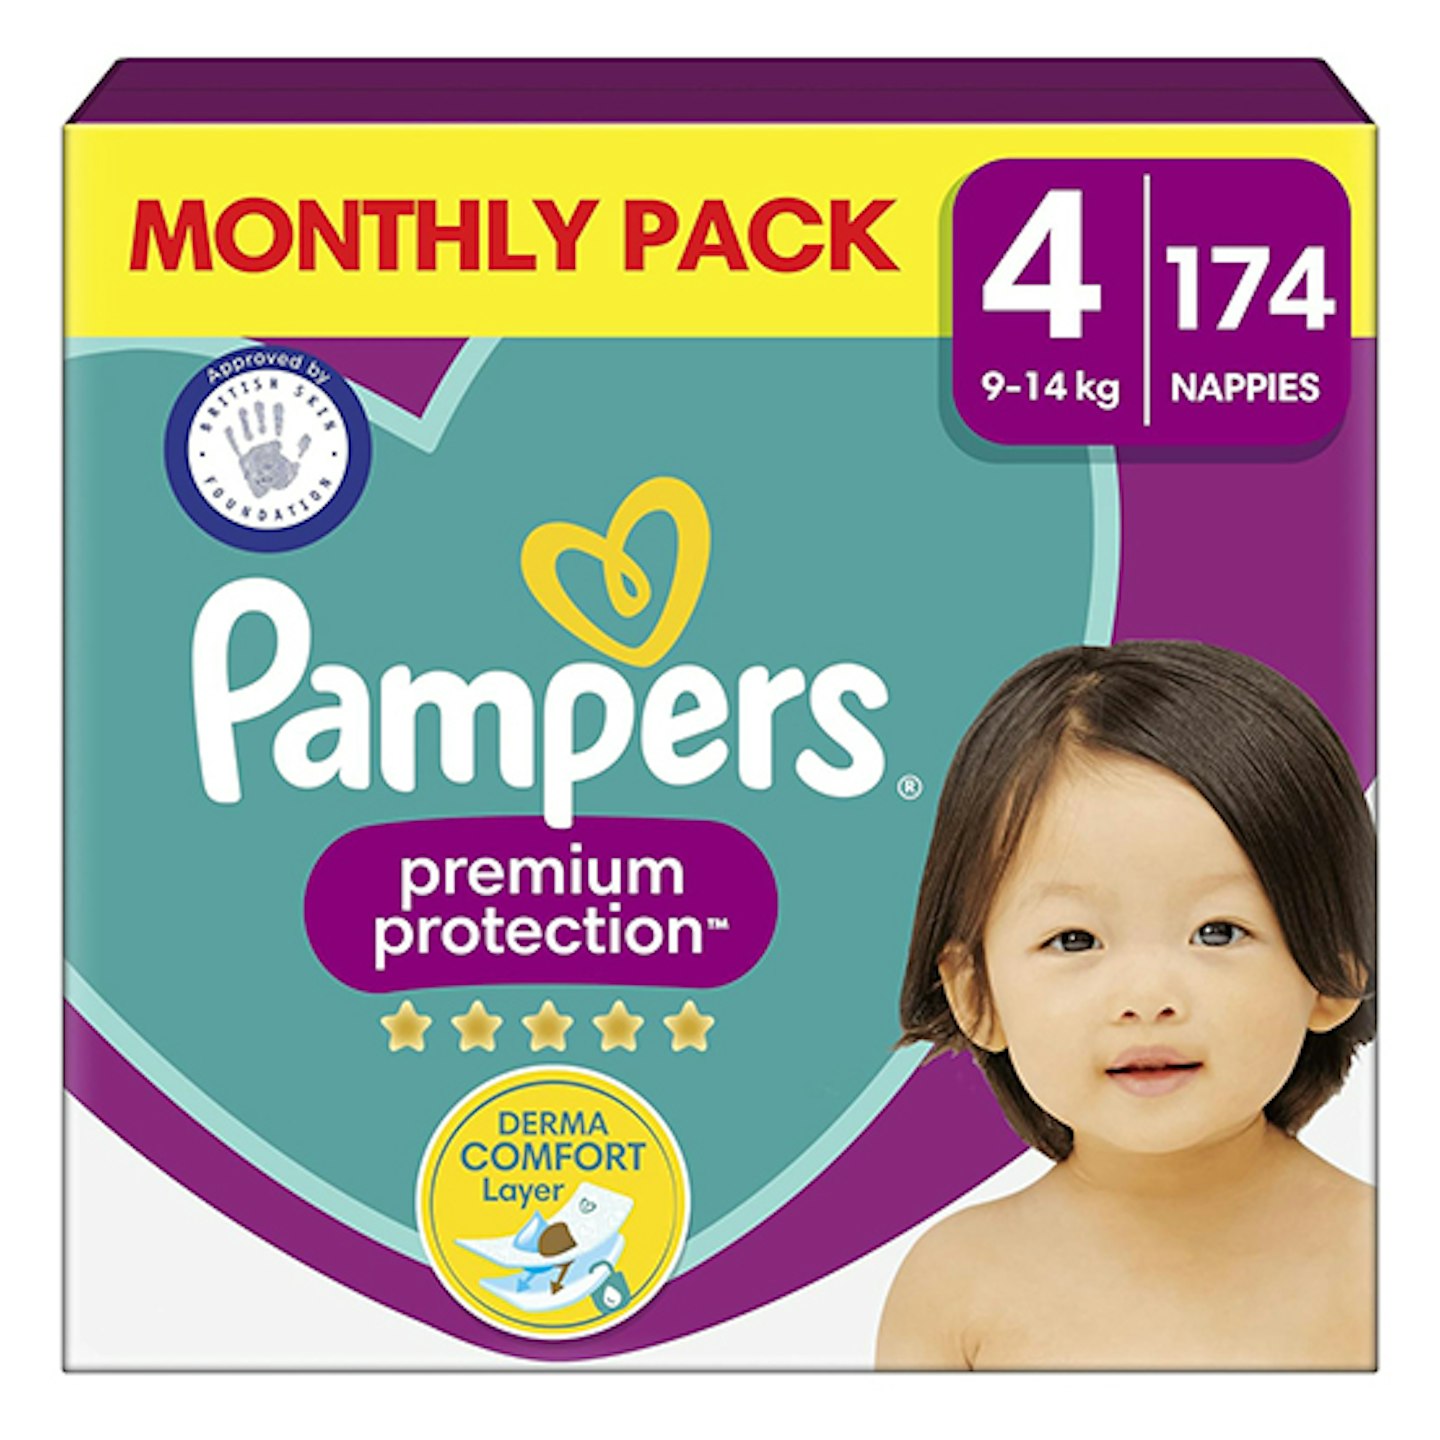 pampers premium protection monthly pack